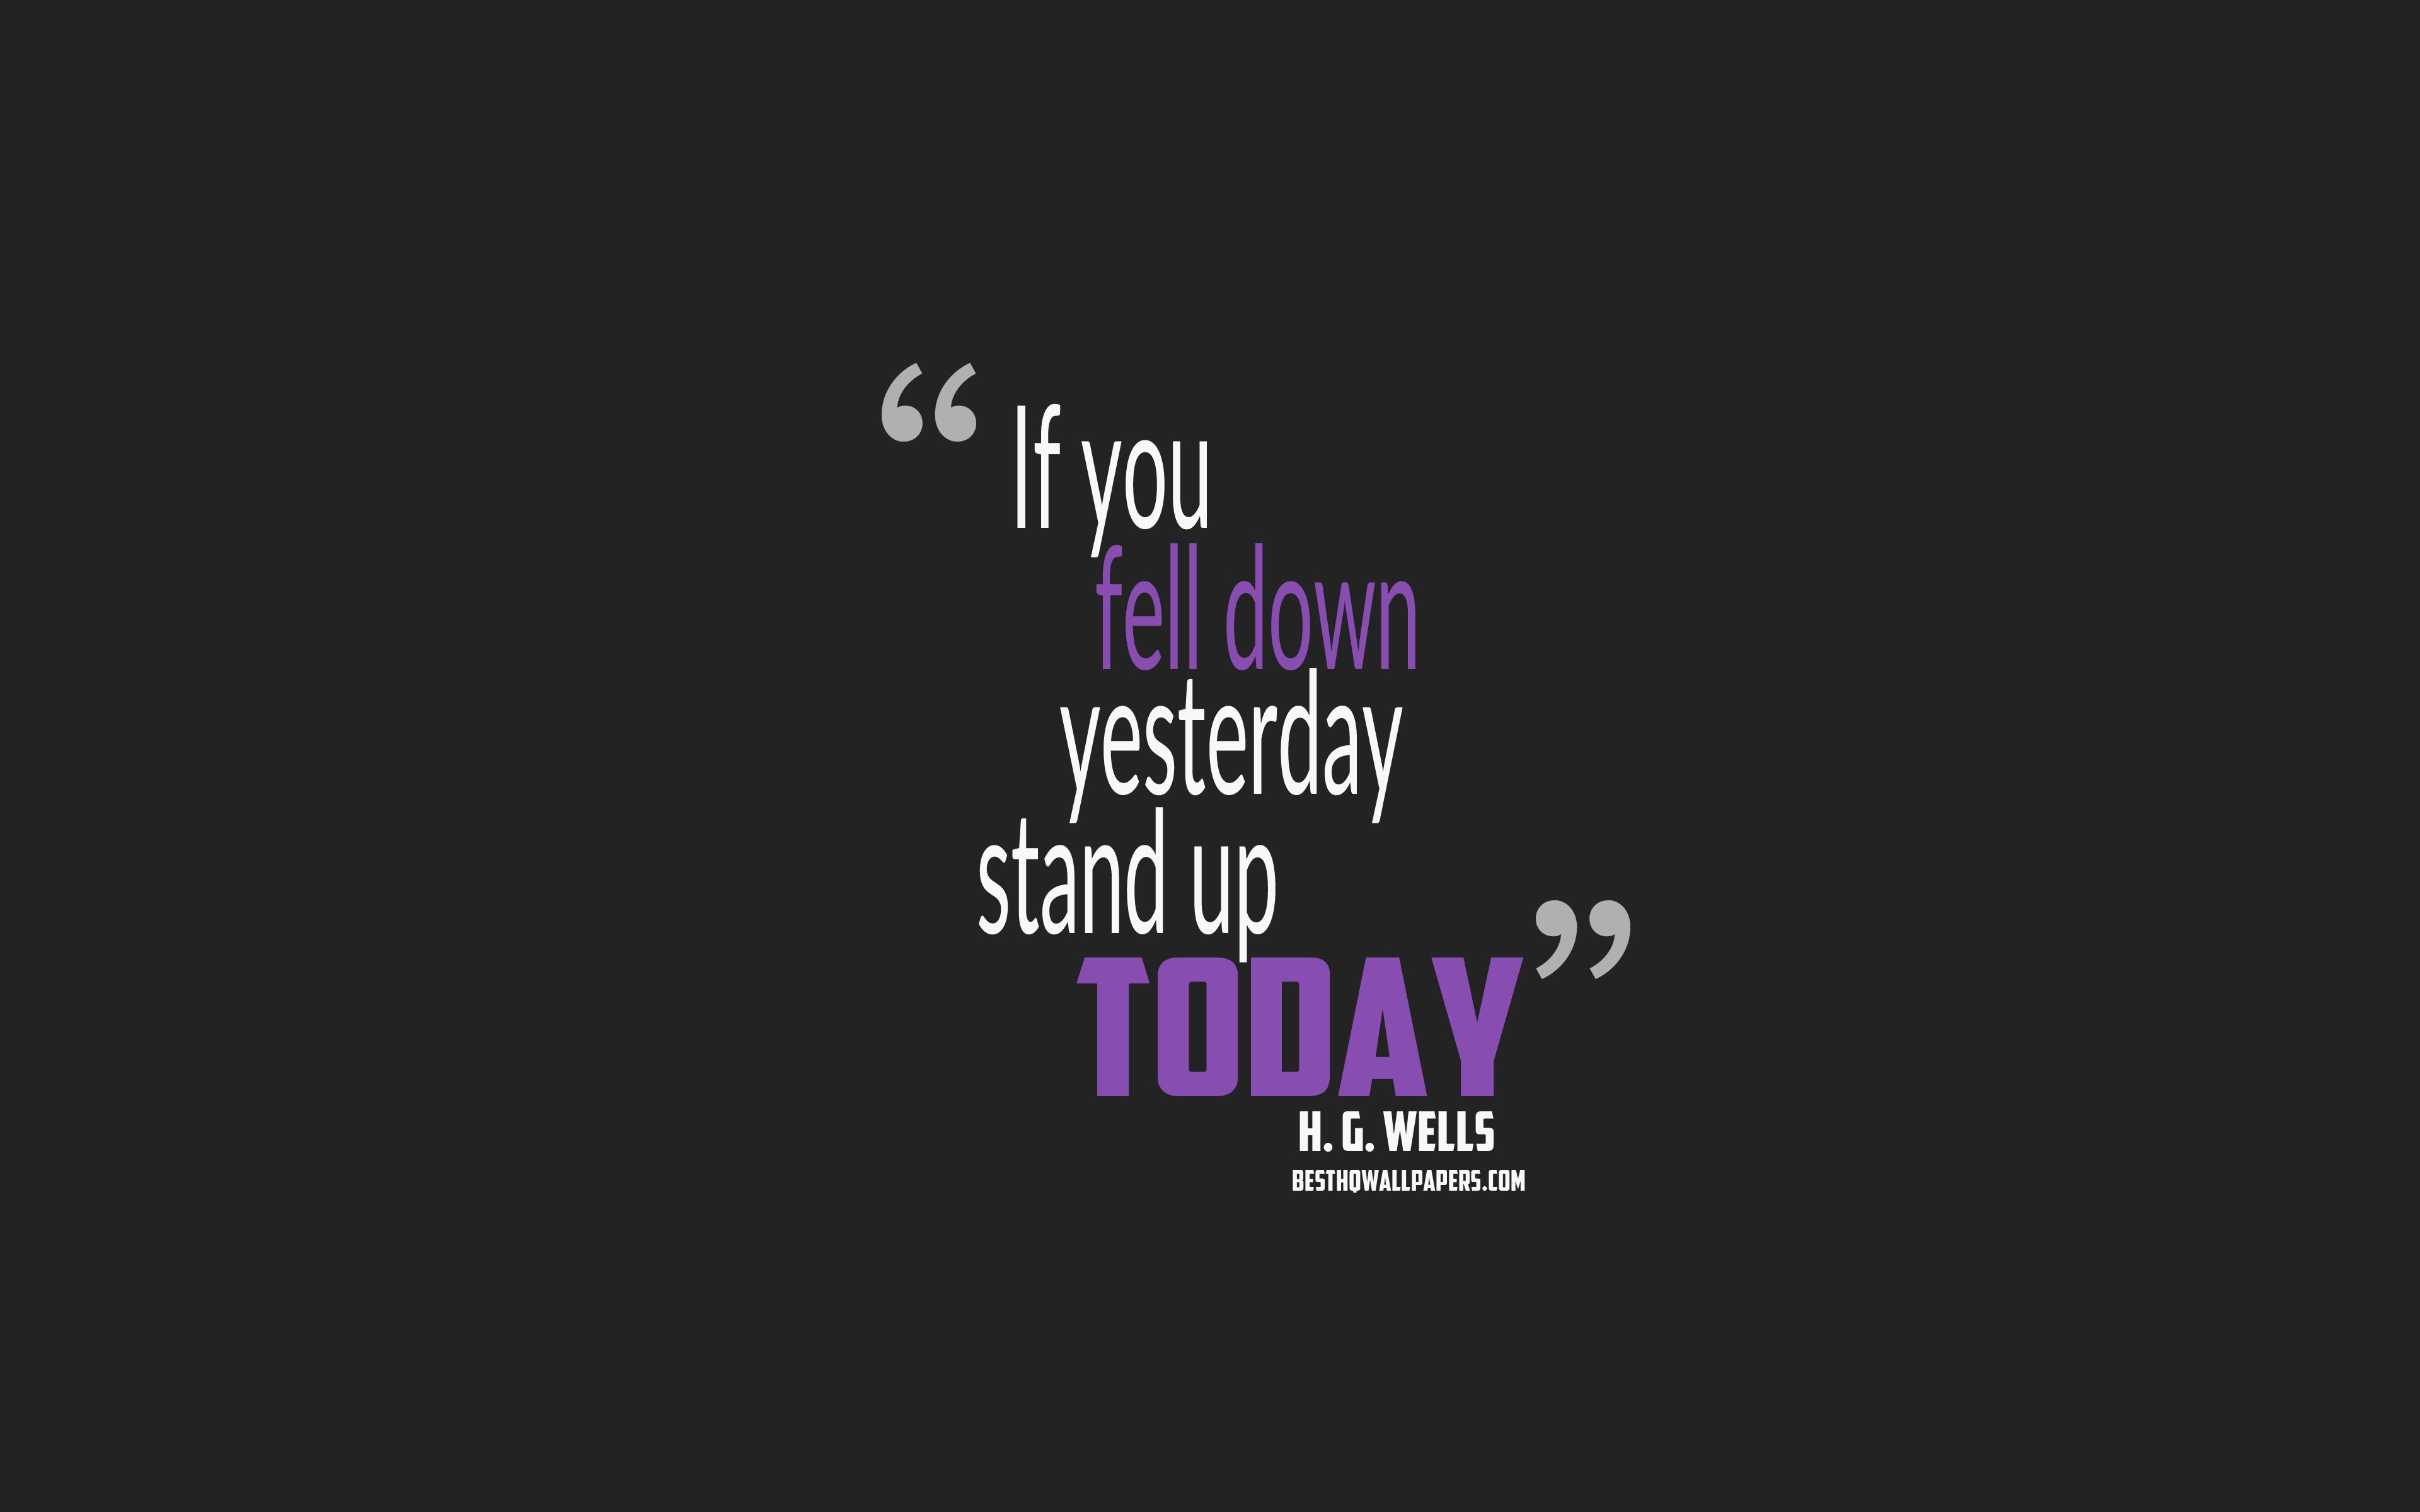 Download wallpaper If you fell down yesterday stand up today, Herbert George Wells quotes, minimalism, motivation quotes, gray background, popular quotes for desktop with resolution 3840x2400. High Quality HD picture wallpaper